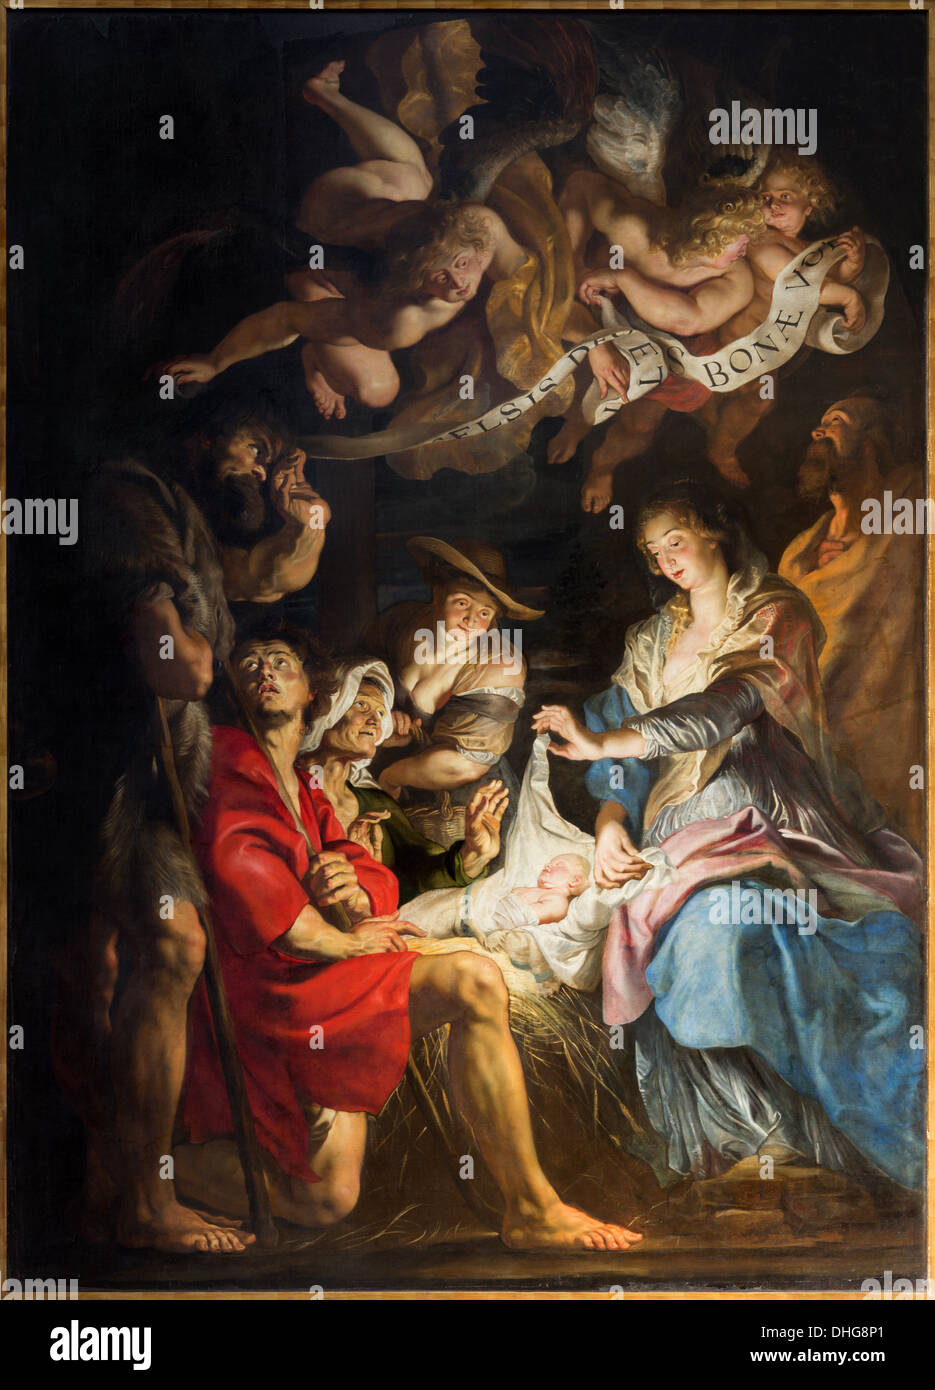 Antwerp - Paint of Nativity scene by by baroque great painter Peter Paul Rubens in St. Pauls church Stock Photo